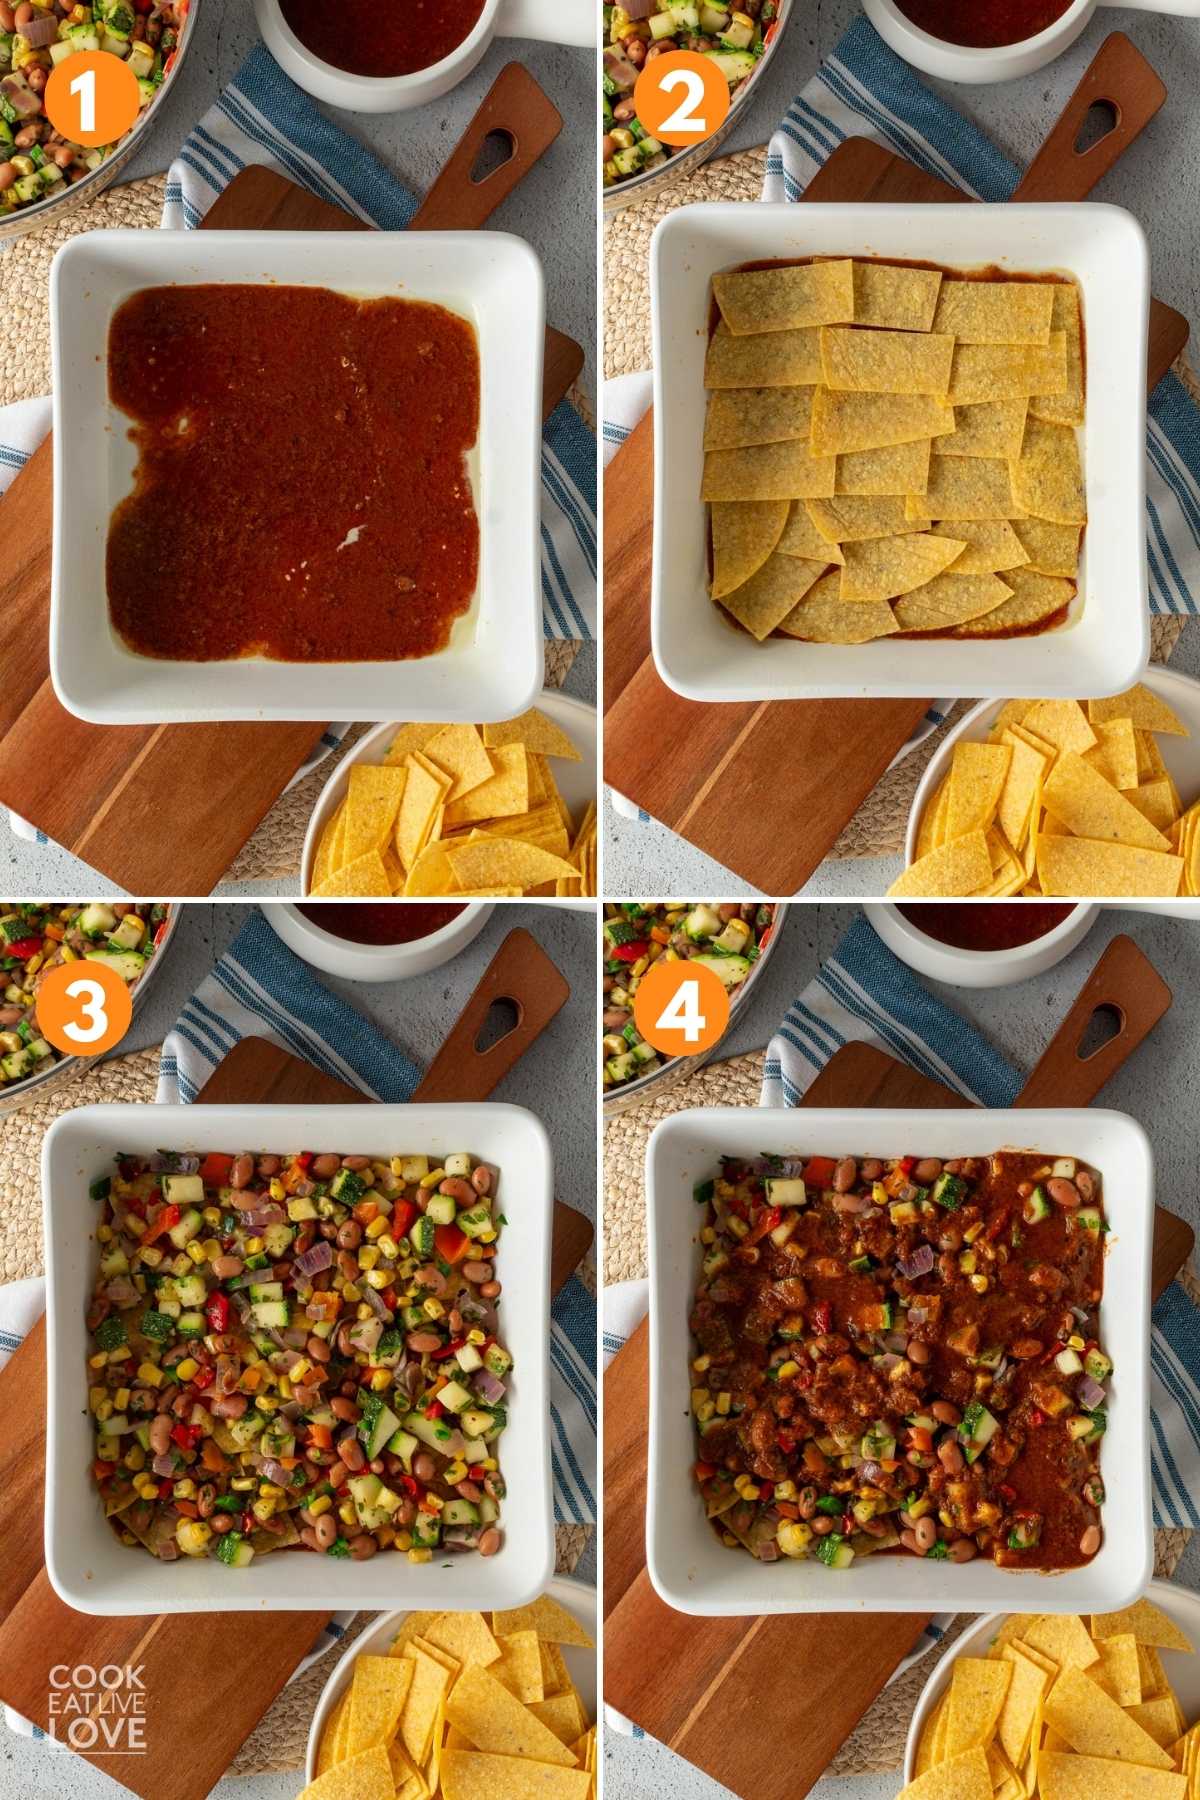 A collage showing the steps for layering the vegan casserole.